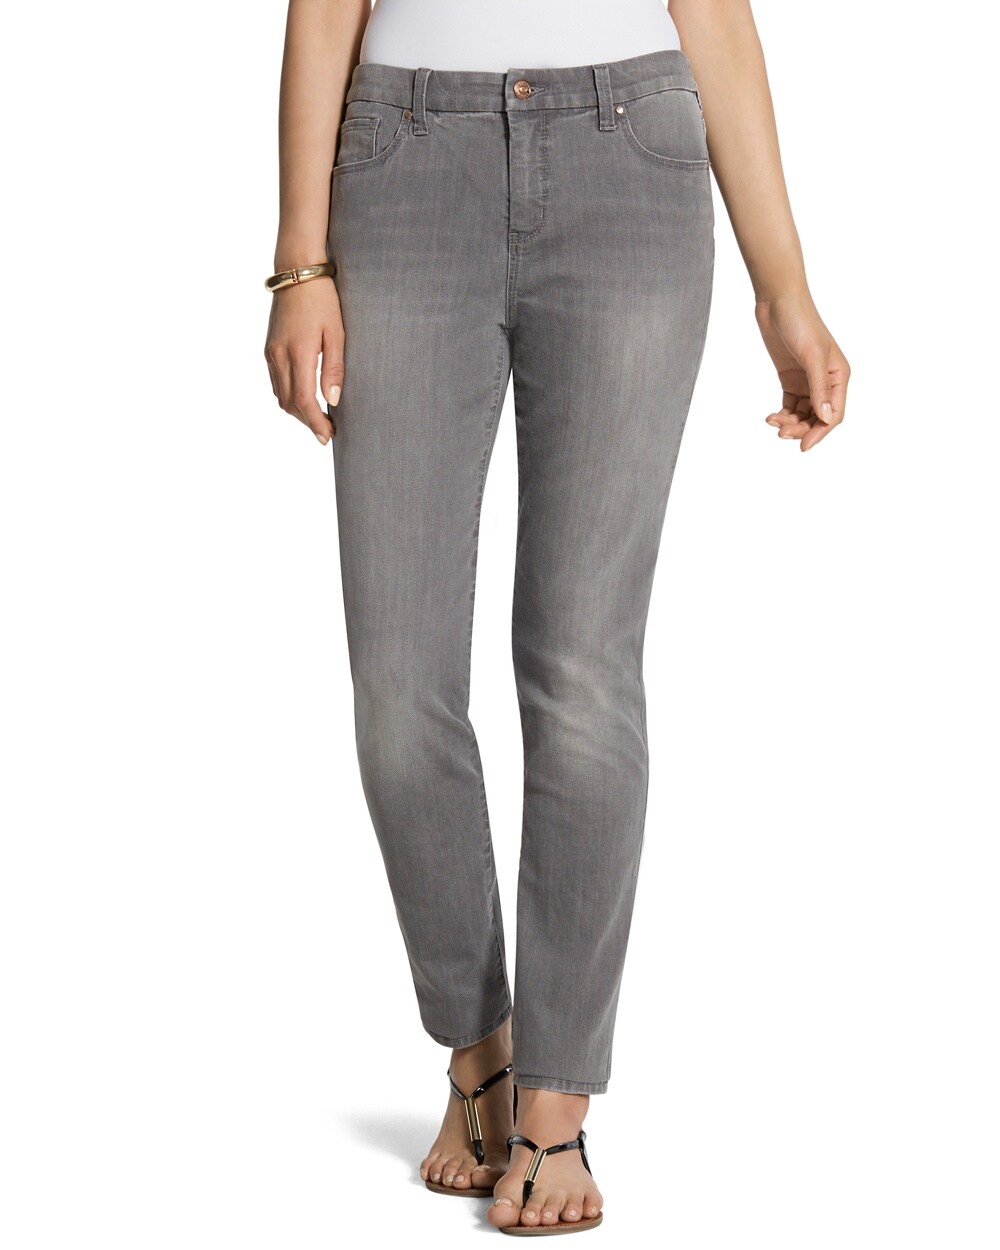 So Slimming Girlfriend Ankle Jeans in Gray